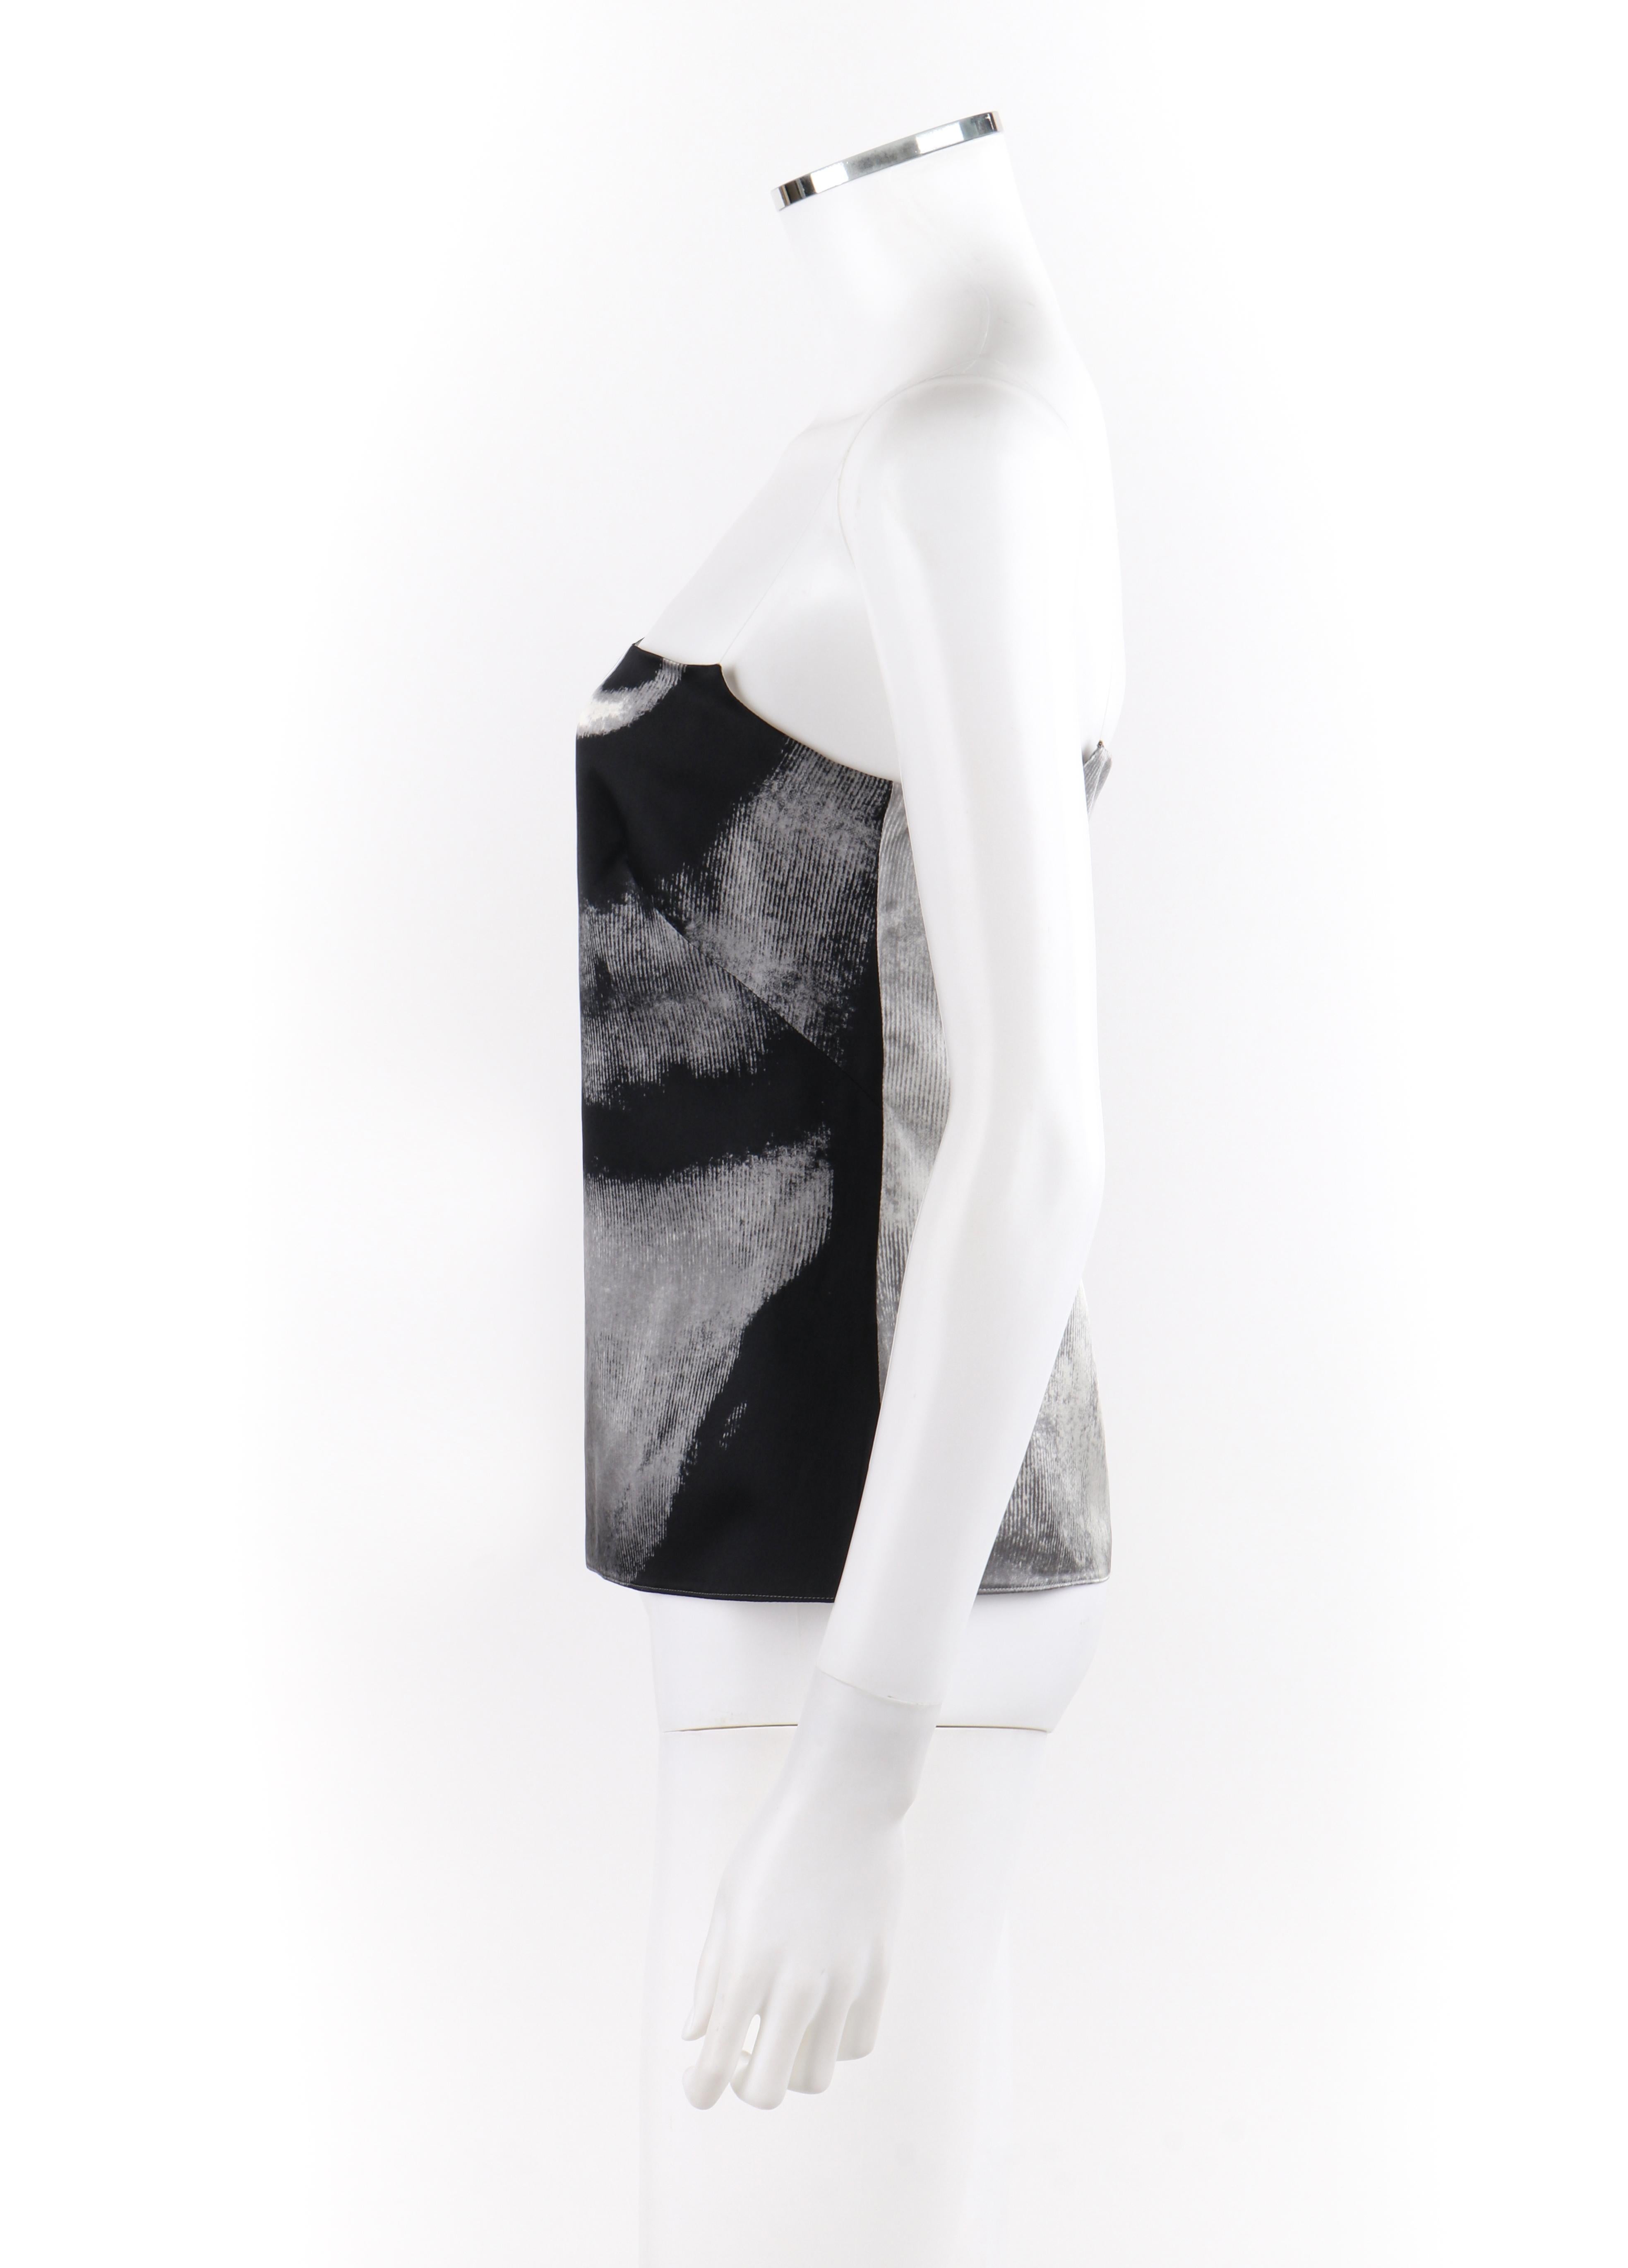 GIVENCHY S/S 1999 ALEXANDER McQUEEN Black White Abstract Eye Illusion Tank Top In Good Condition For Sale In Thiensville, WI